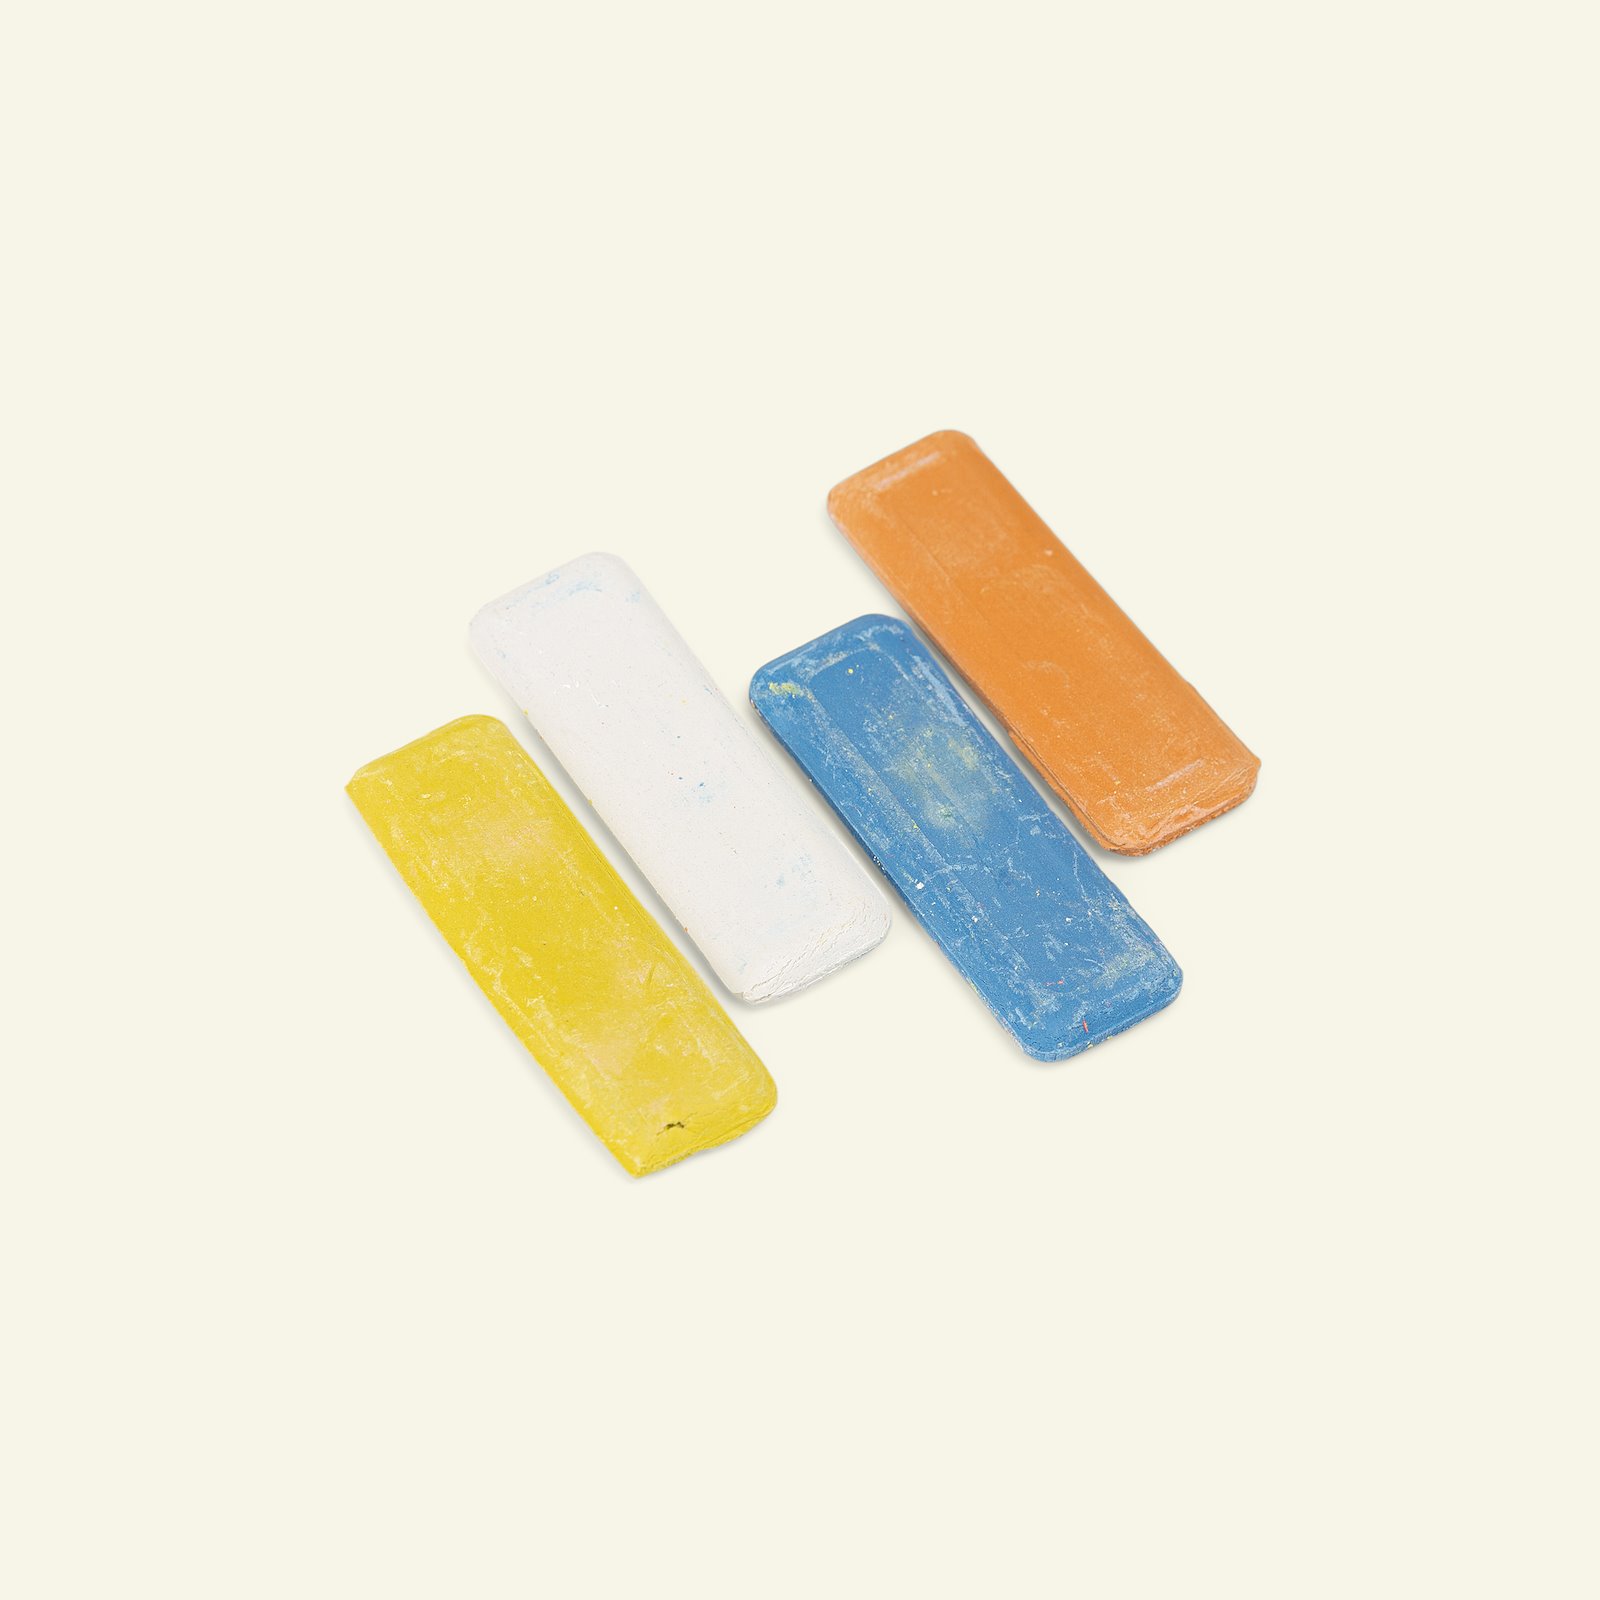 Tailors chalk 20x50mm 4 colours/pack 40900_pack